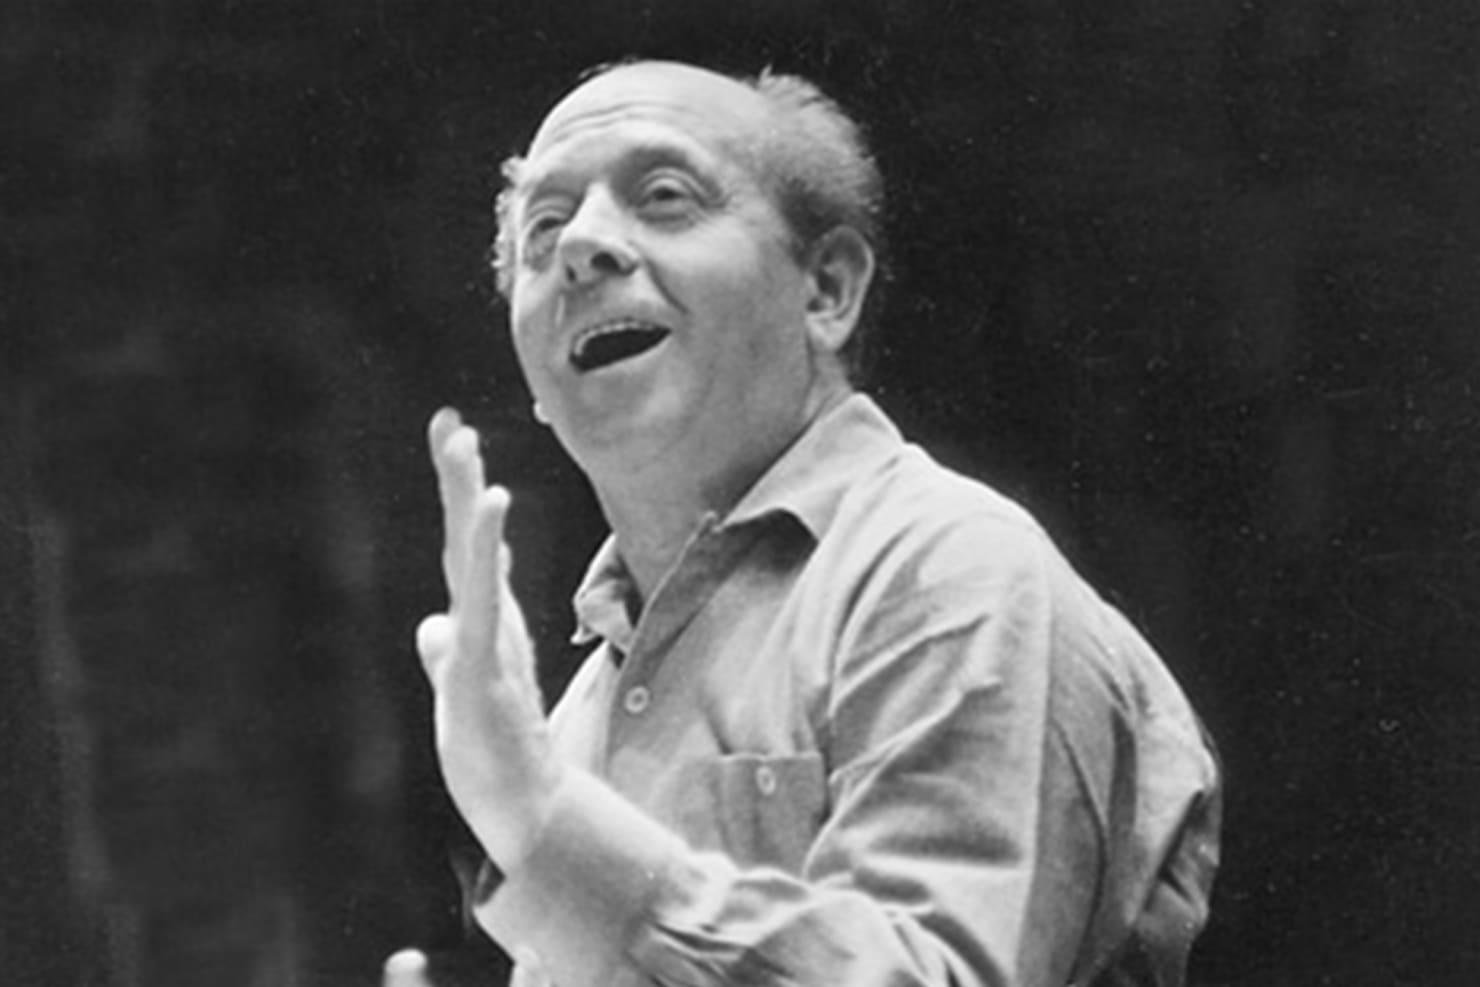 Eugene Ormandy, Hungarian-born American conductor and violinist